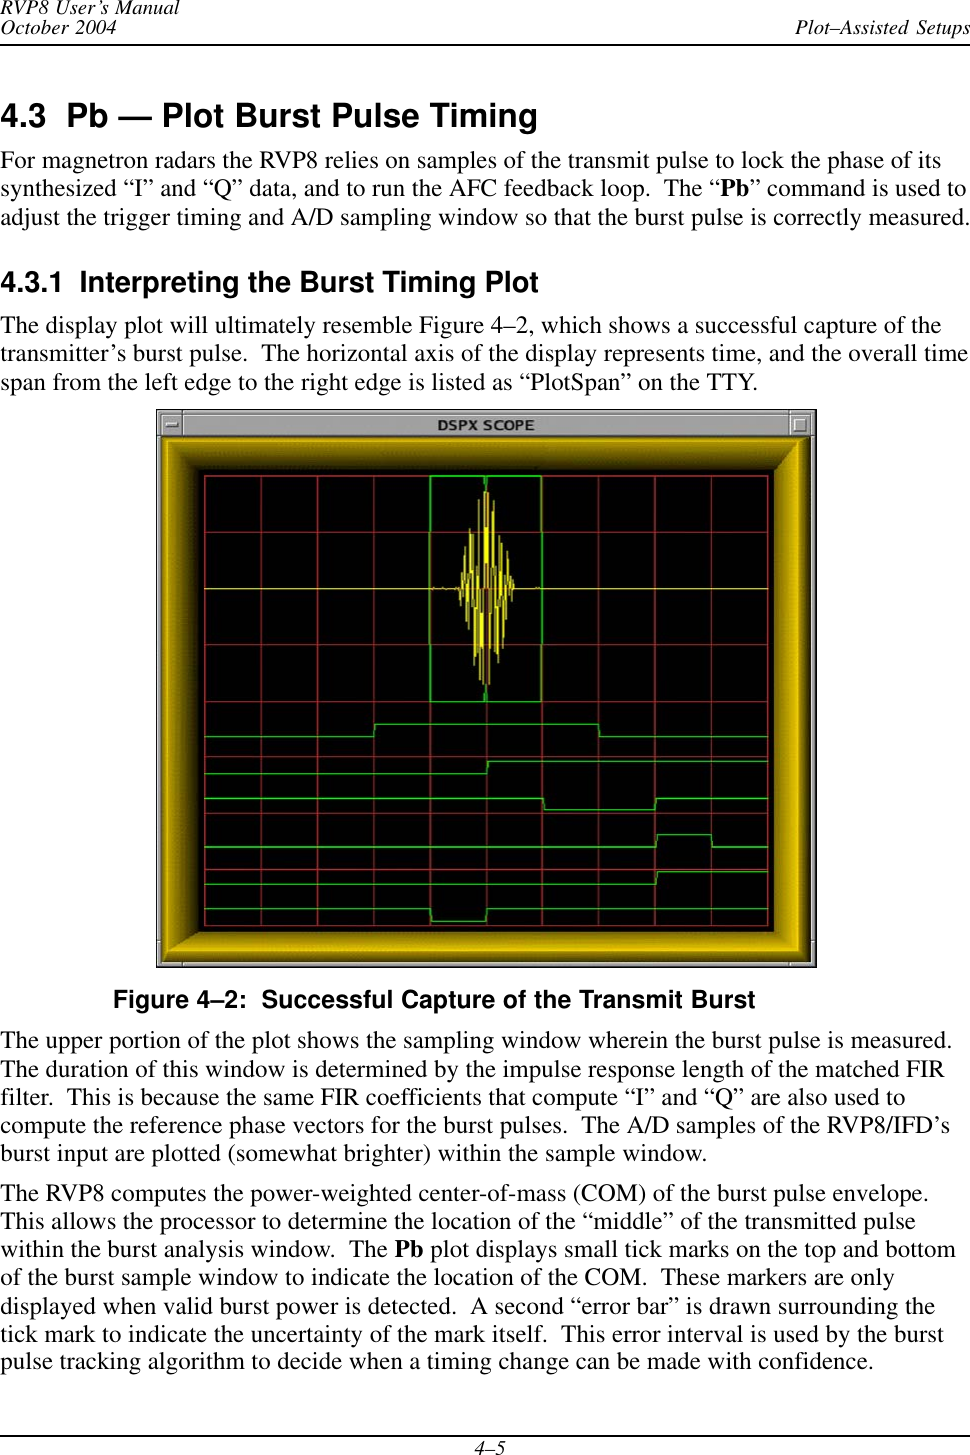 Plot–Assisted SetupsRVP8 User’s ManualOctober 20044–54.3  Pb — Plot Burst Pulse TimingFor magnetron radars the RVP8 relies on samples of the transmit pulse to lock the phase of itssynthesized “I” and “Q” data, and to run the AFC feedback loop.  The “Pb” command is used toadjust the trigger timing and A/D sampling window so that the burst pulse is correctly measured.4.3.1  Interpreting the Burst Timing PlotThe display plot will ultimately resemble Figure 4–2, which shows a successful capture of thetransmitter’s burst pulse.  The horizontal axis of the display represents time, and the overall timespan from the left edge to the right edge is listed as “PlotSpan” on the TTY.Figure 4–2:  Successful Capture of the Transmit BurstThe upper portion of the plot shows the sampling window wherein the burst pulse is measured.The duration of this window is determined by the impulse response length of the matched FIRfilter.  This is because the same FIR coefficients that compute “I” and “Q” are also used tocompute the reference phase vectors for the burst pulses.  The A/D samples of the RVP8/IFD’sburst input are plotted (somewhat brighter) within the sample window.The RVP8 computes the power-weighted center-of-mass (COM) of the burst pulse envelope.This allows the processor to determine the location of the “middle” of the transmitted pulsewithin the burst analysis window.  The Pb plot displays small tick marks on the top and bottomof the burst sample window to indicate the location of the COM.  These markers are onlydisplayed when valid burst power is detected.  A second “error bar” is drawn surrounding thetick mark to indicate the uncertainty of the mark itself.  This error interval is used by the burstpulse tracking algorithm to decide when a timing change can be made with confidence.